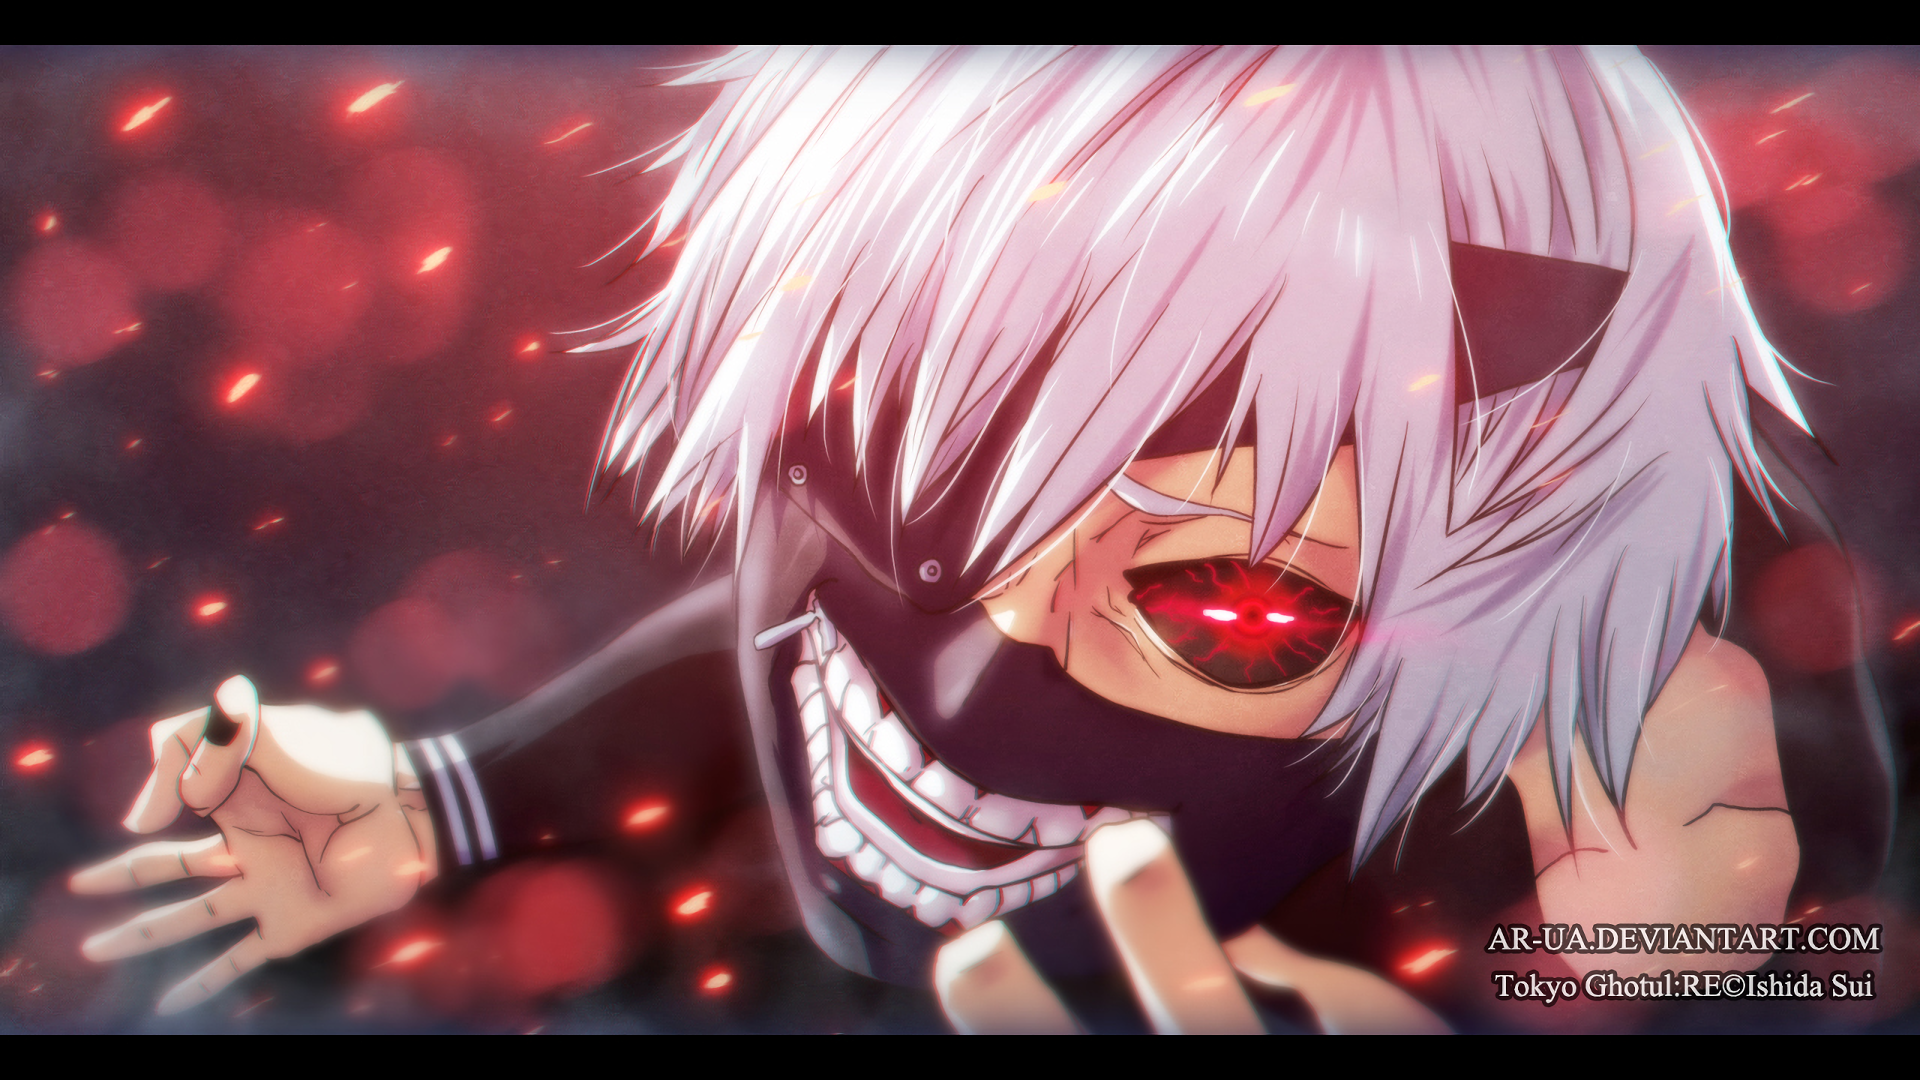 Tokyo Ghoul:re by AR-UA